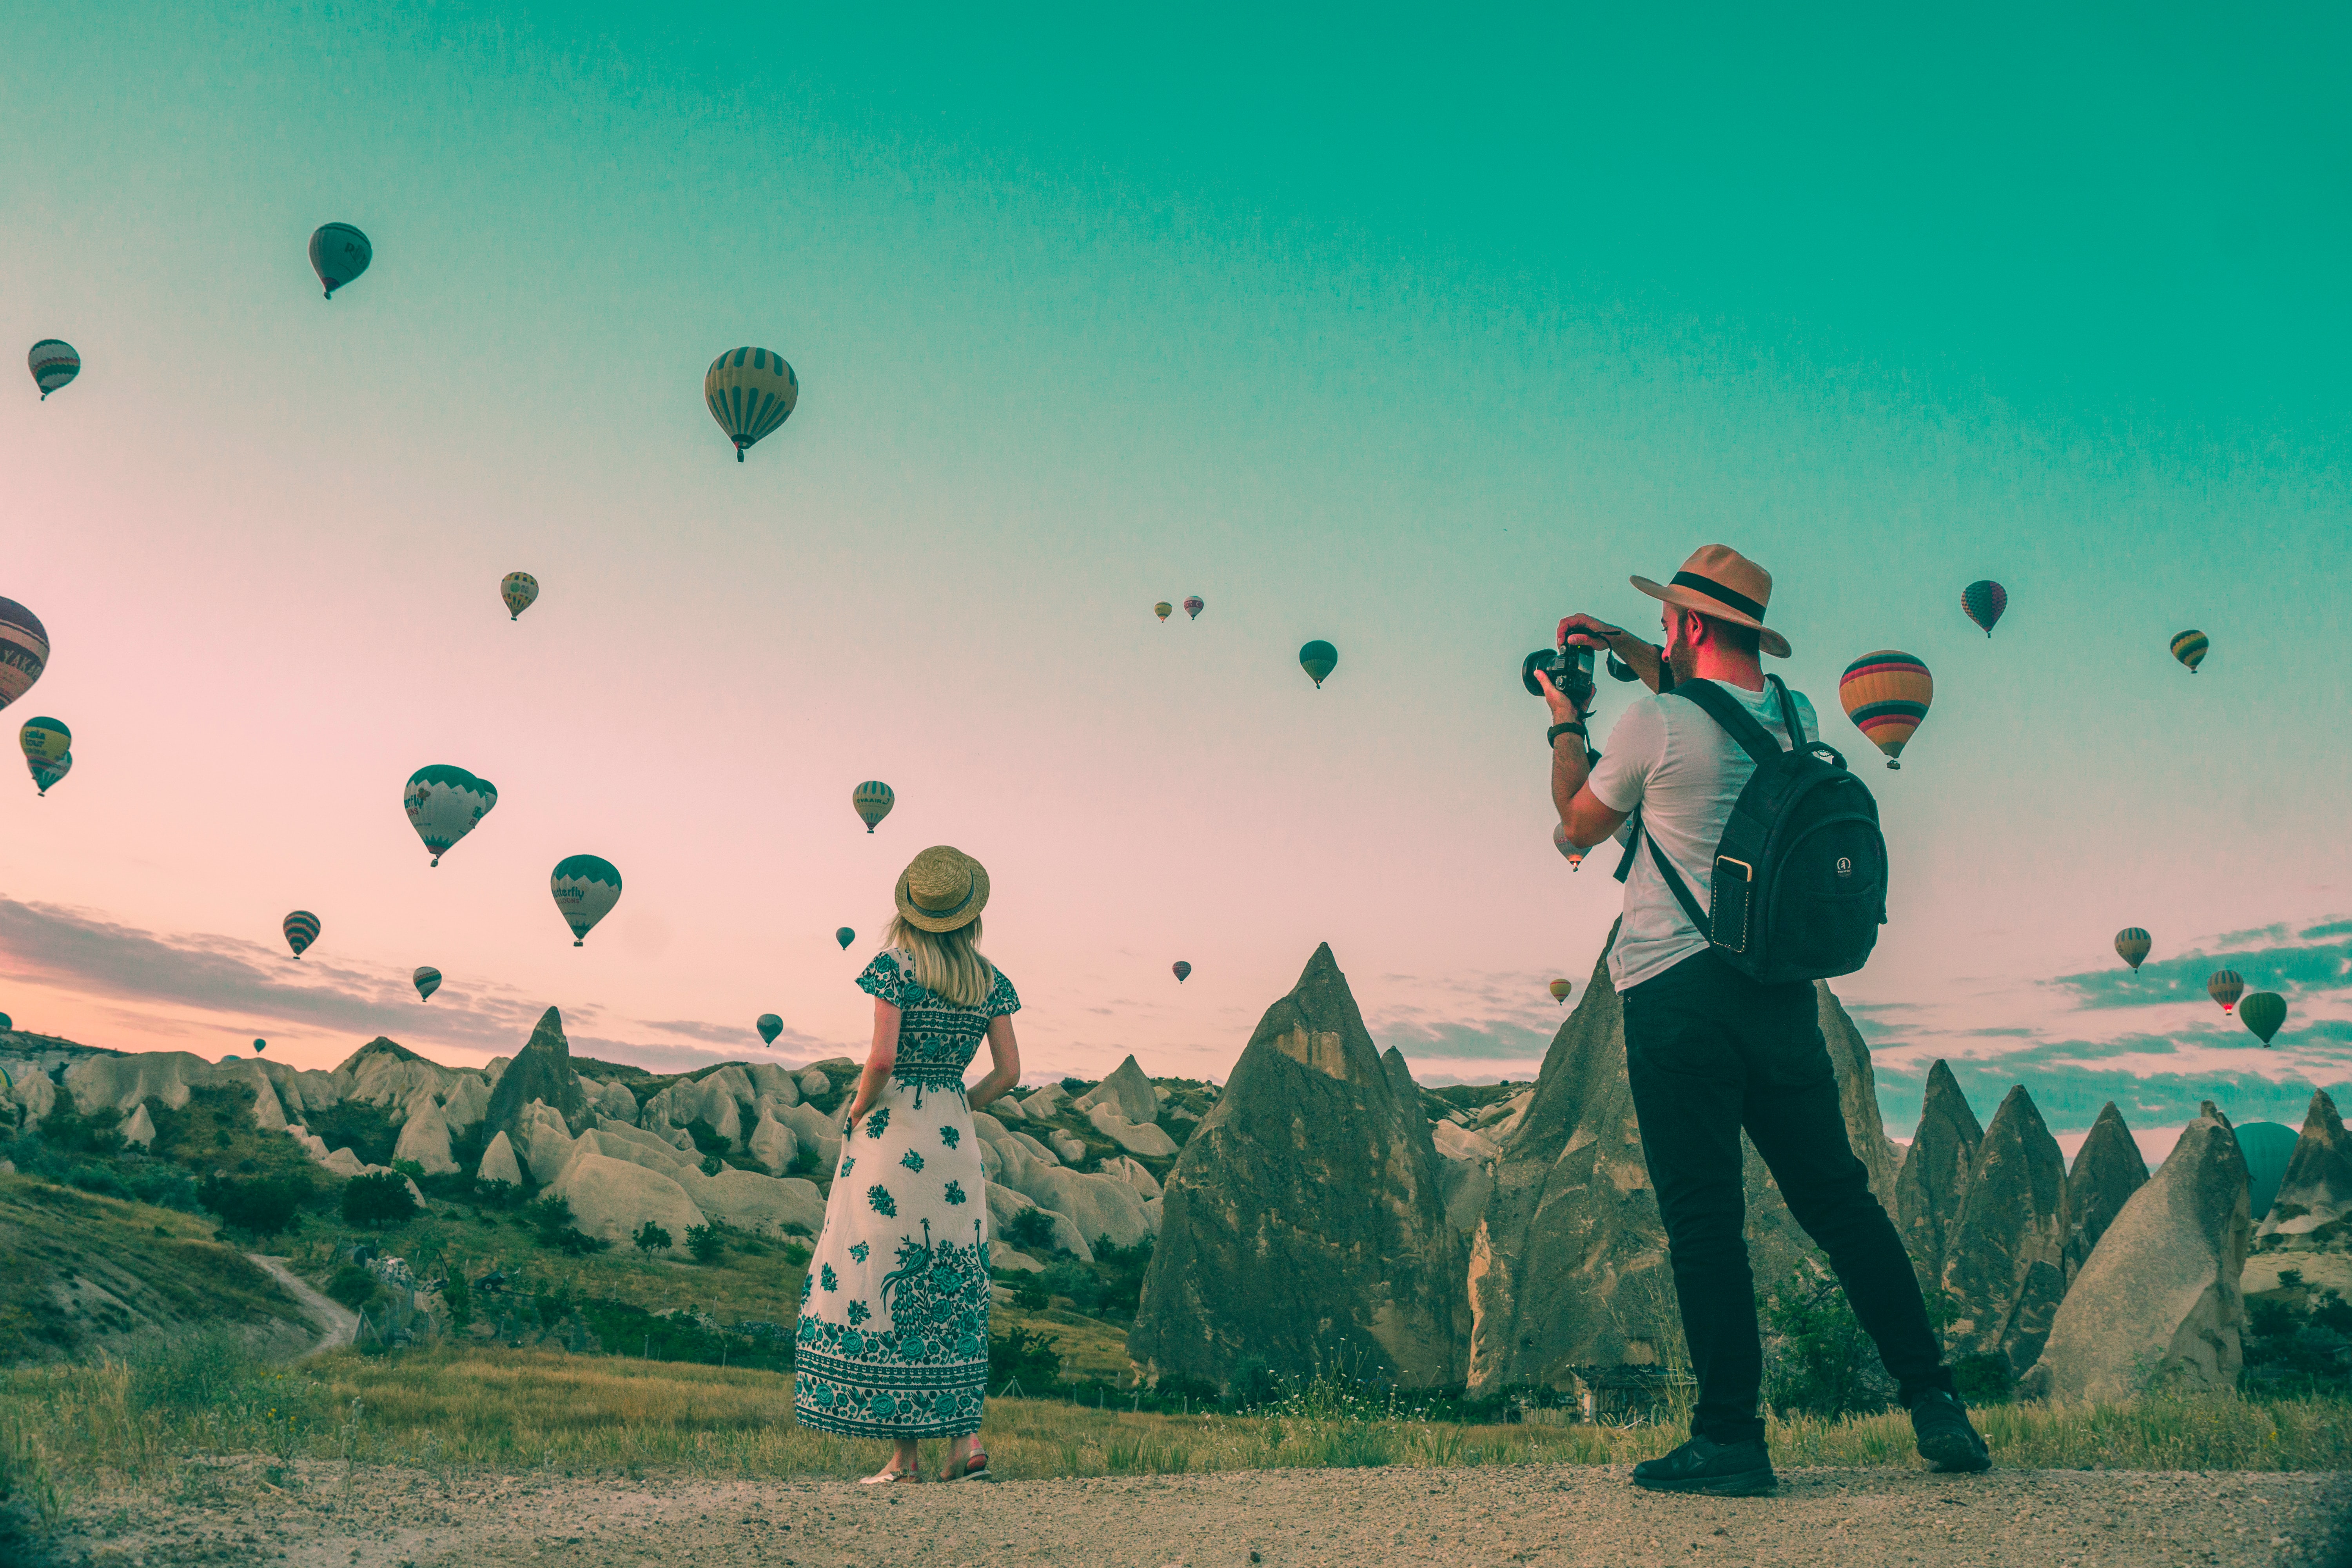 Two people taking pictures surrounded by rock structures and hot air balloons travel words